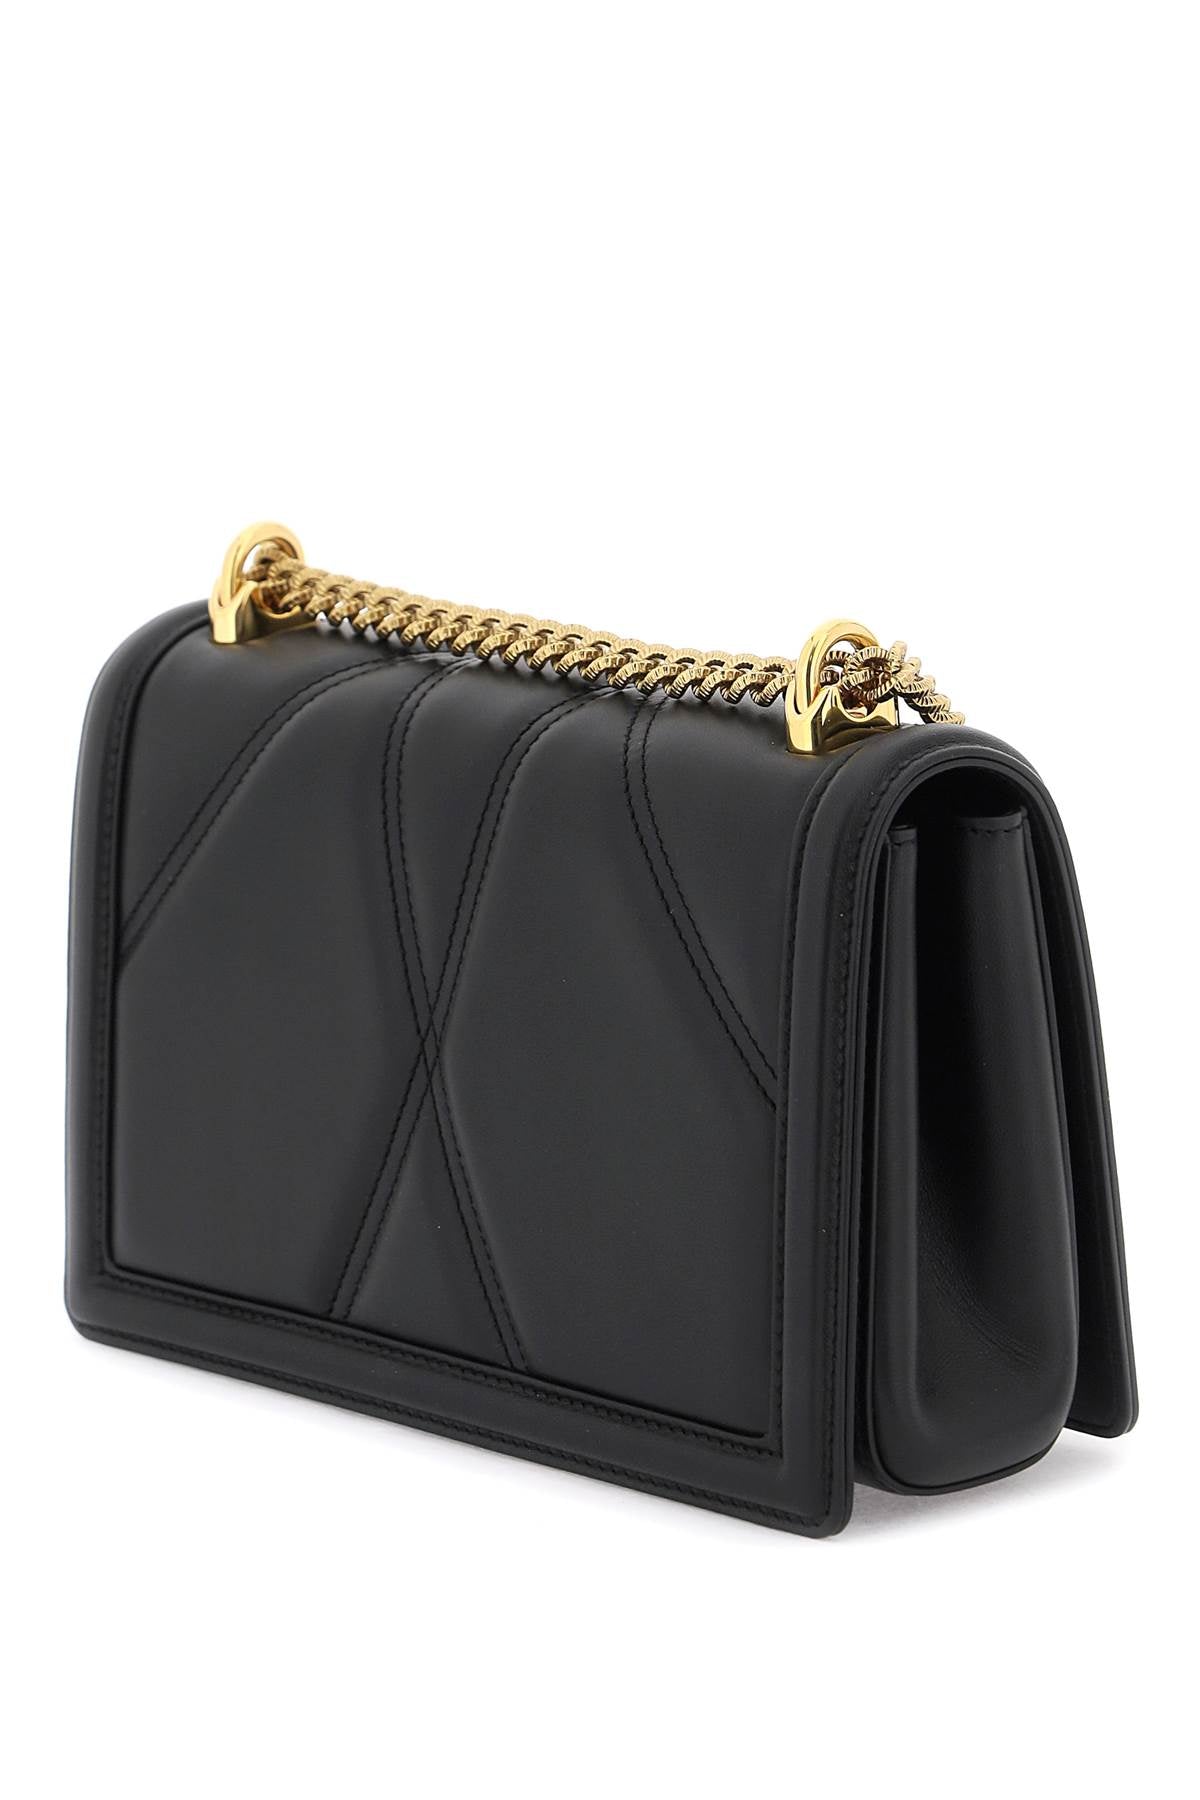 Dolce & Gabbana Dolce & gabbana medium devotion bag in quilted nappa leather